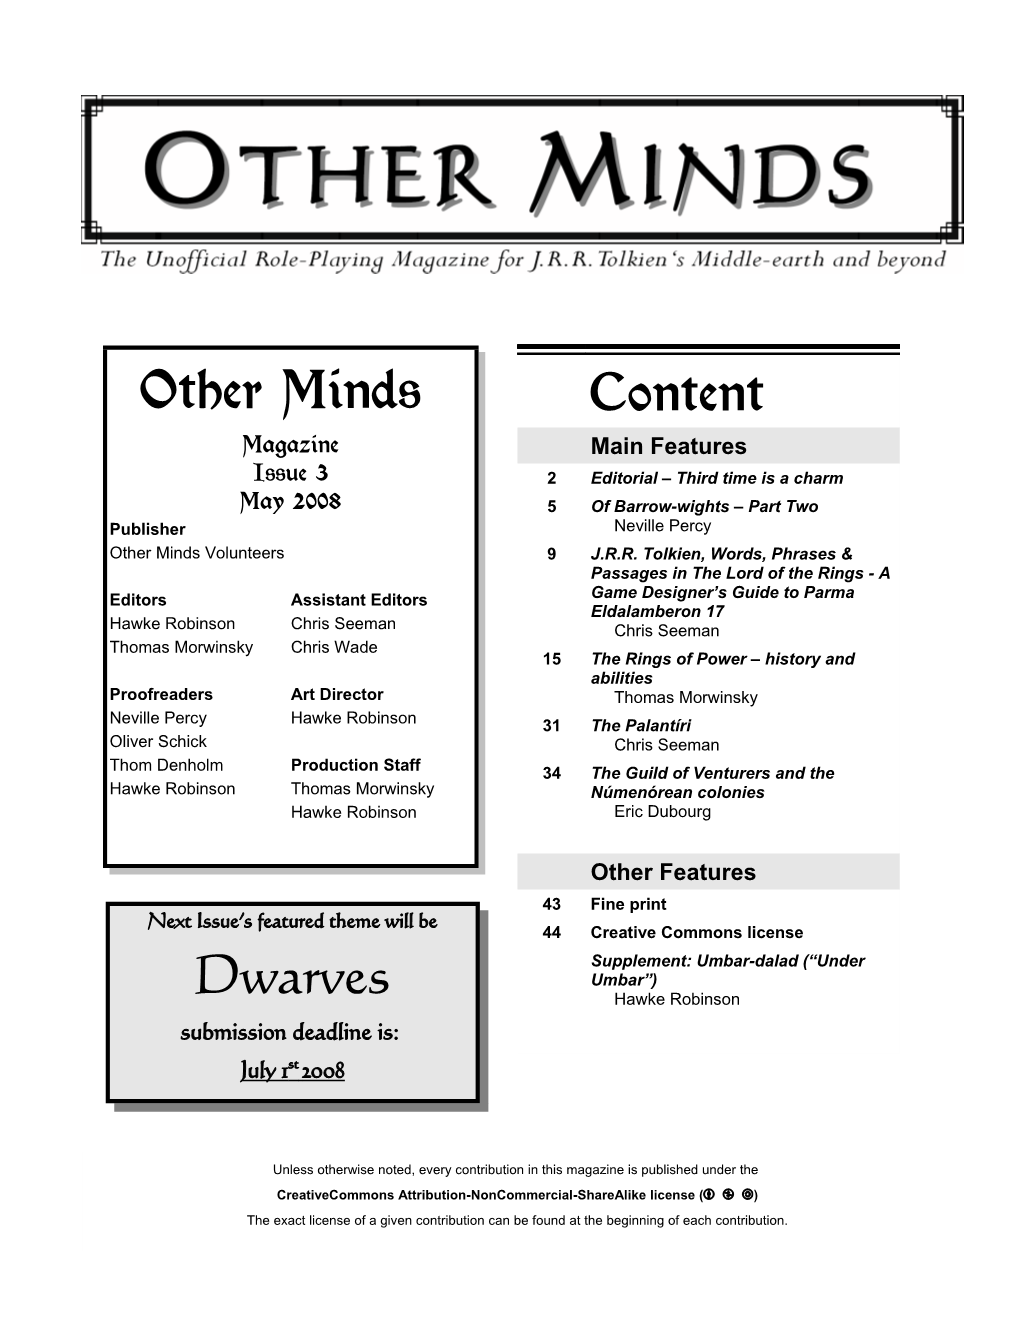 Issue 3, May 2008